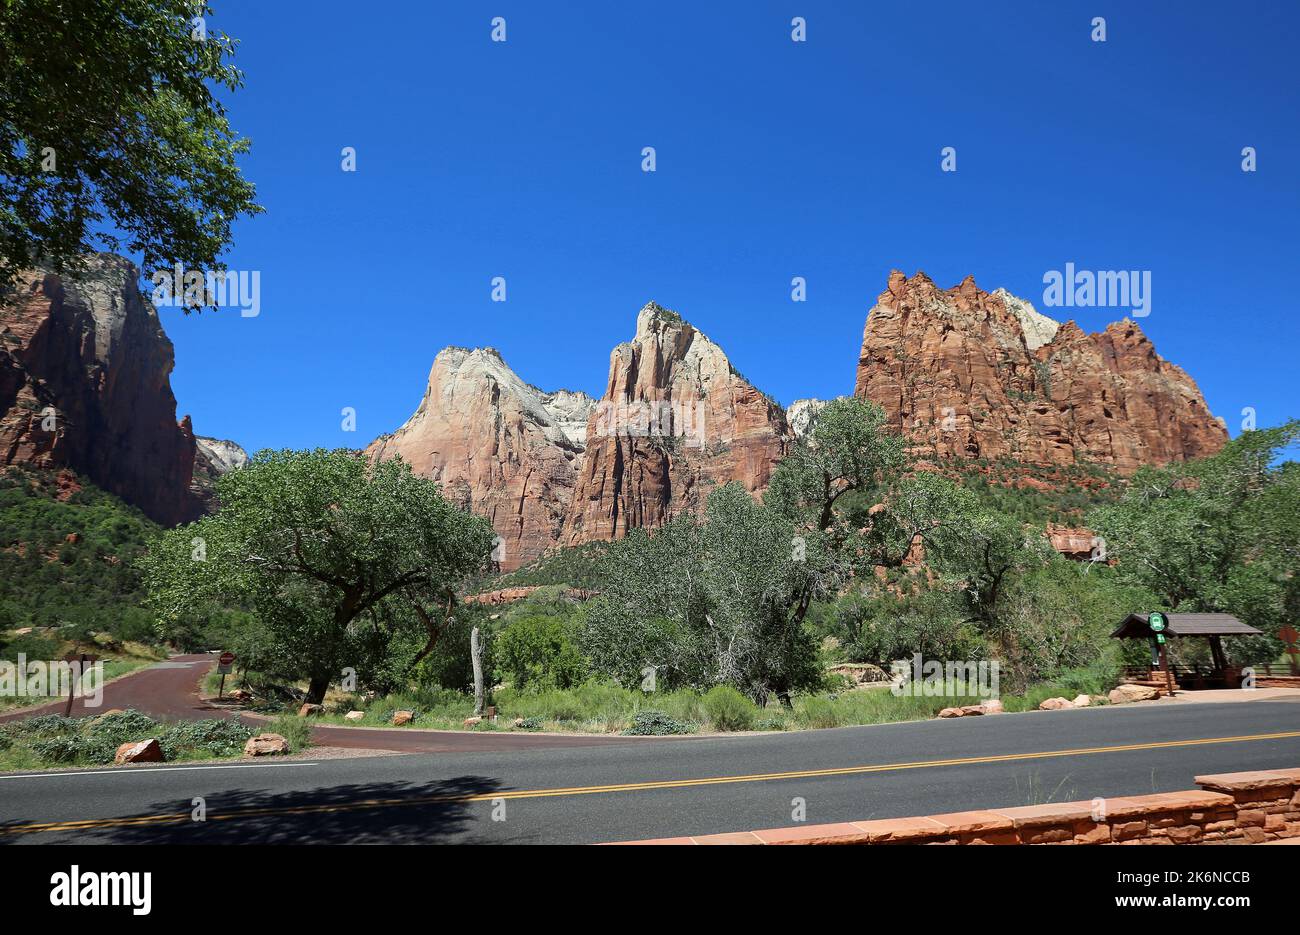 The trail to the Court of the Patriarchs - Zion National Park, Utah Stock Photo